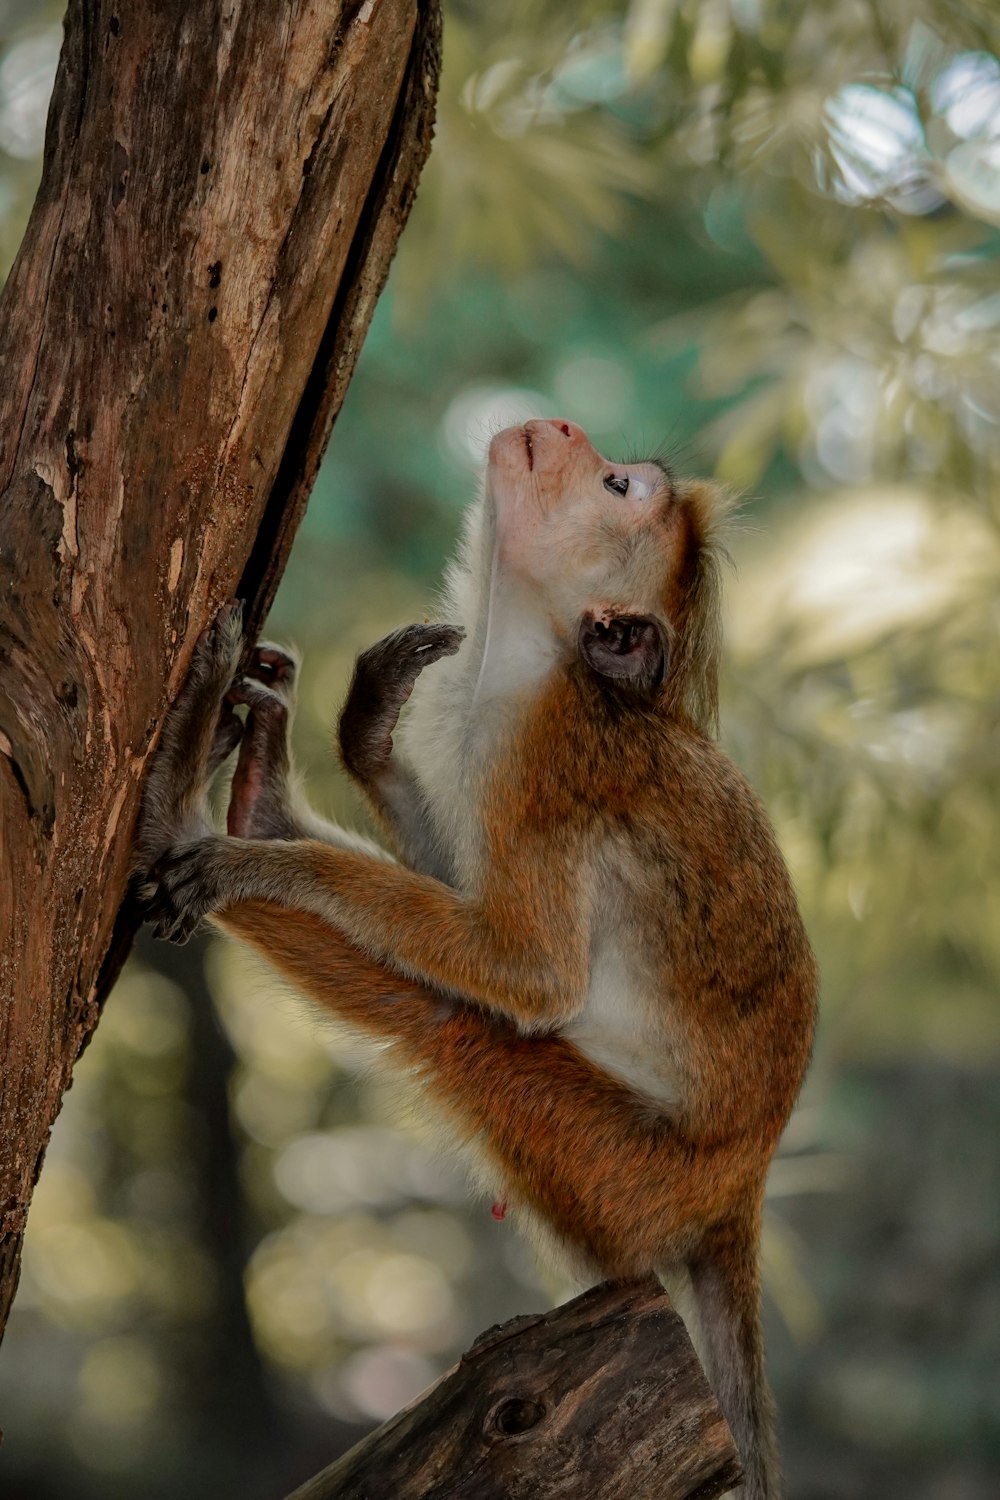 a brown and white monkey sitting on top of a tree branch